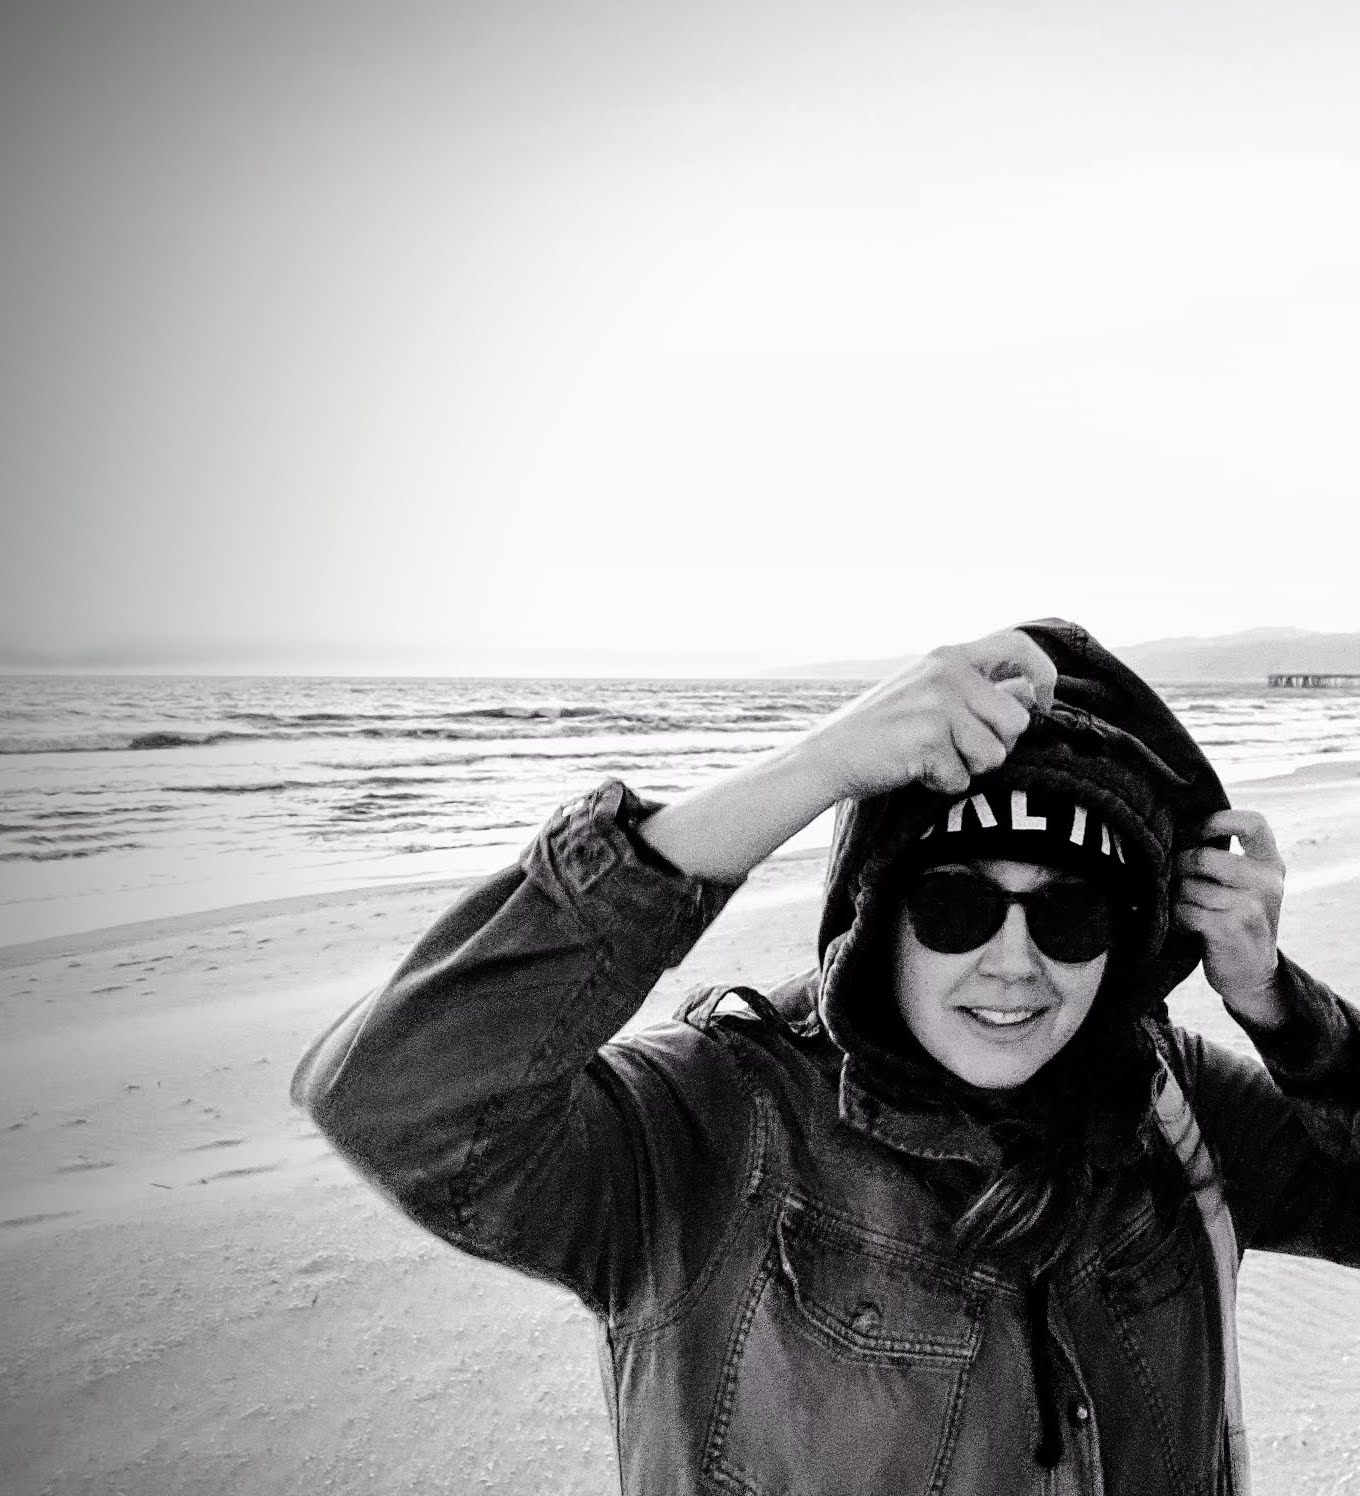 A black-and-white photo of a light-skinned woman standing on a beach, holding her jacket's hood up. She wears black sunglasses and smiles at the camera slightly.